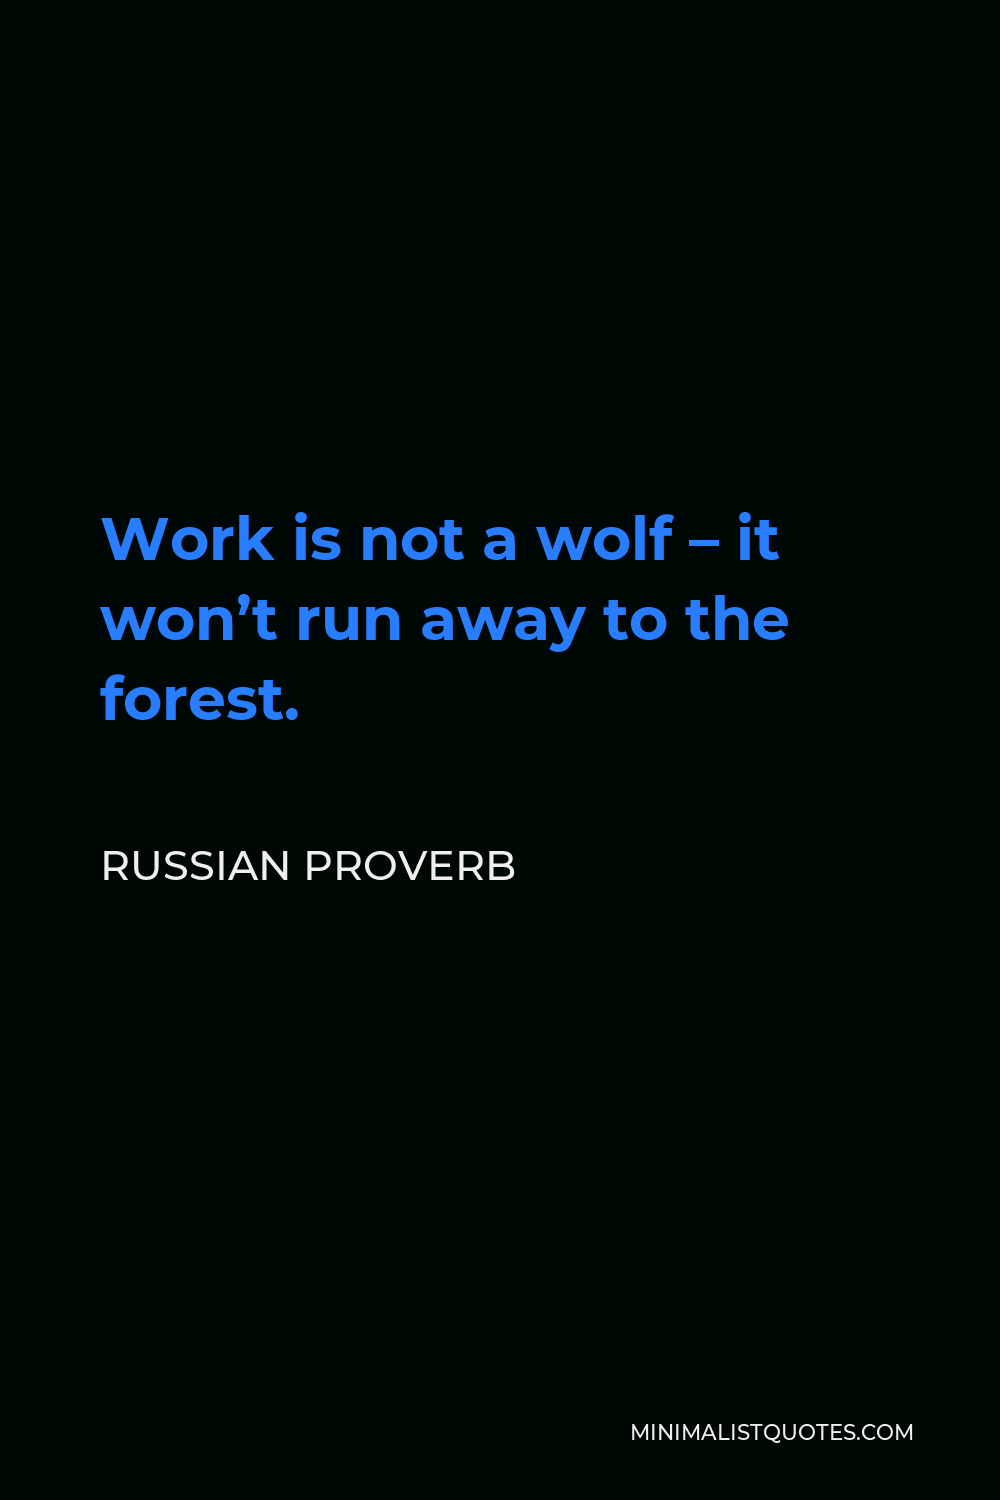 Russian Proverb Quote - Work is not a wolf – it won’t run away to the forest.